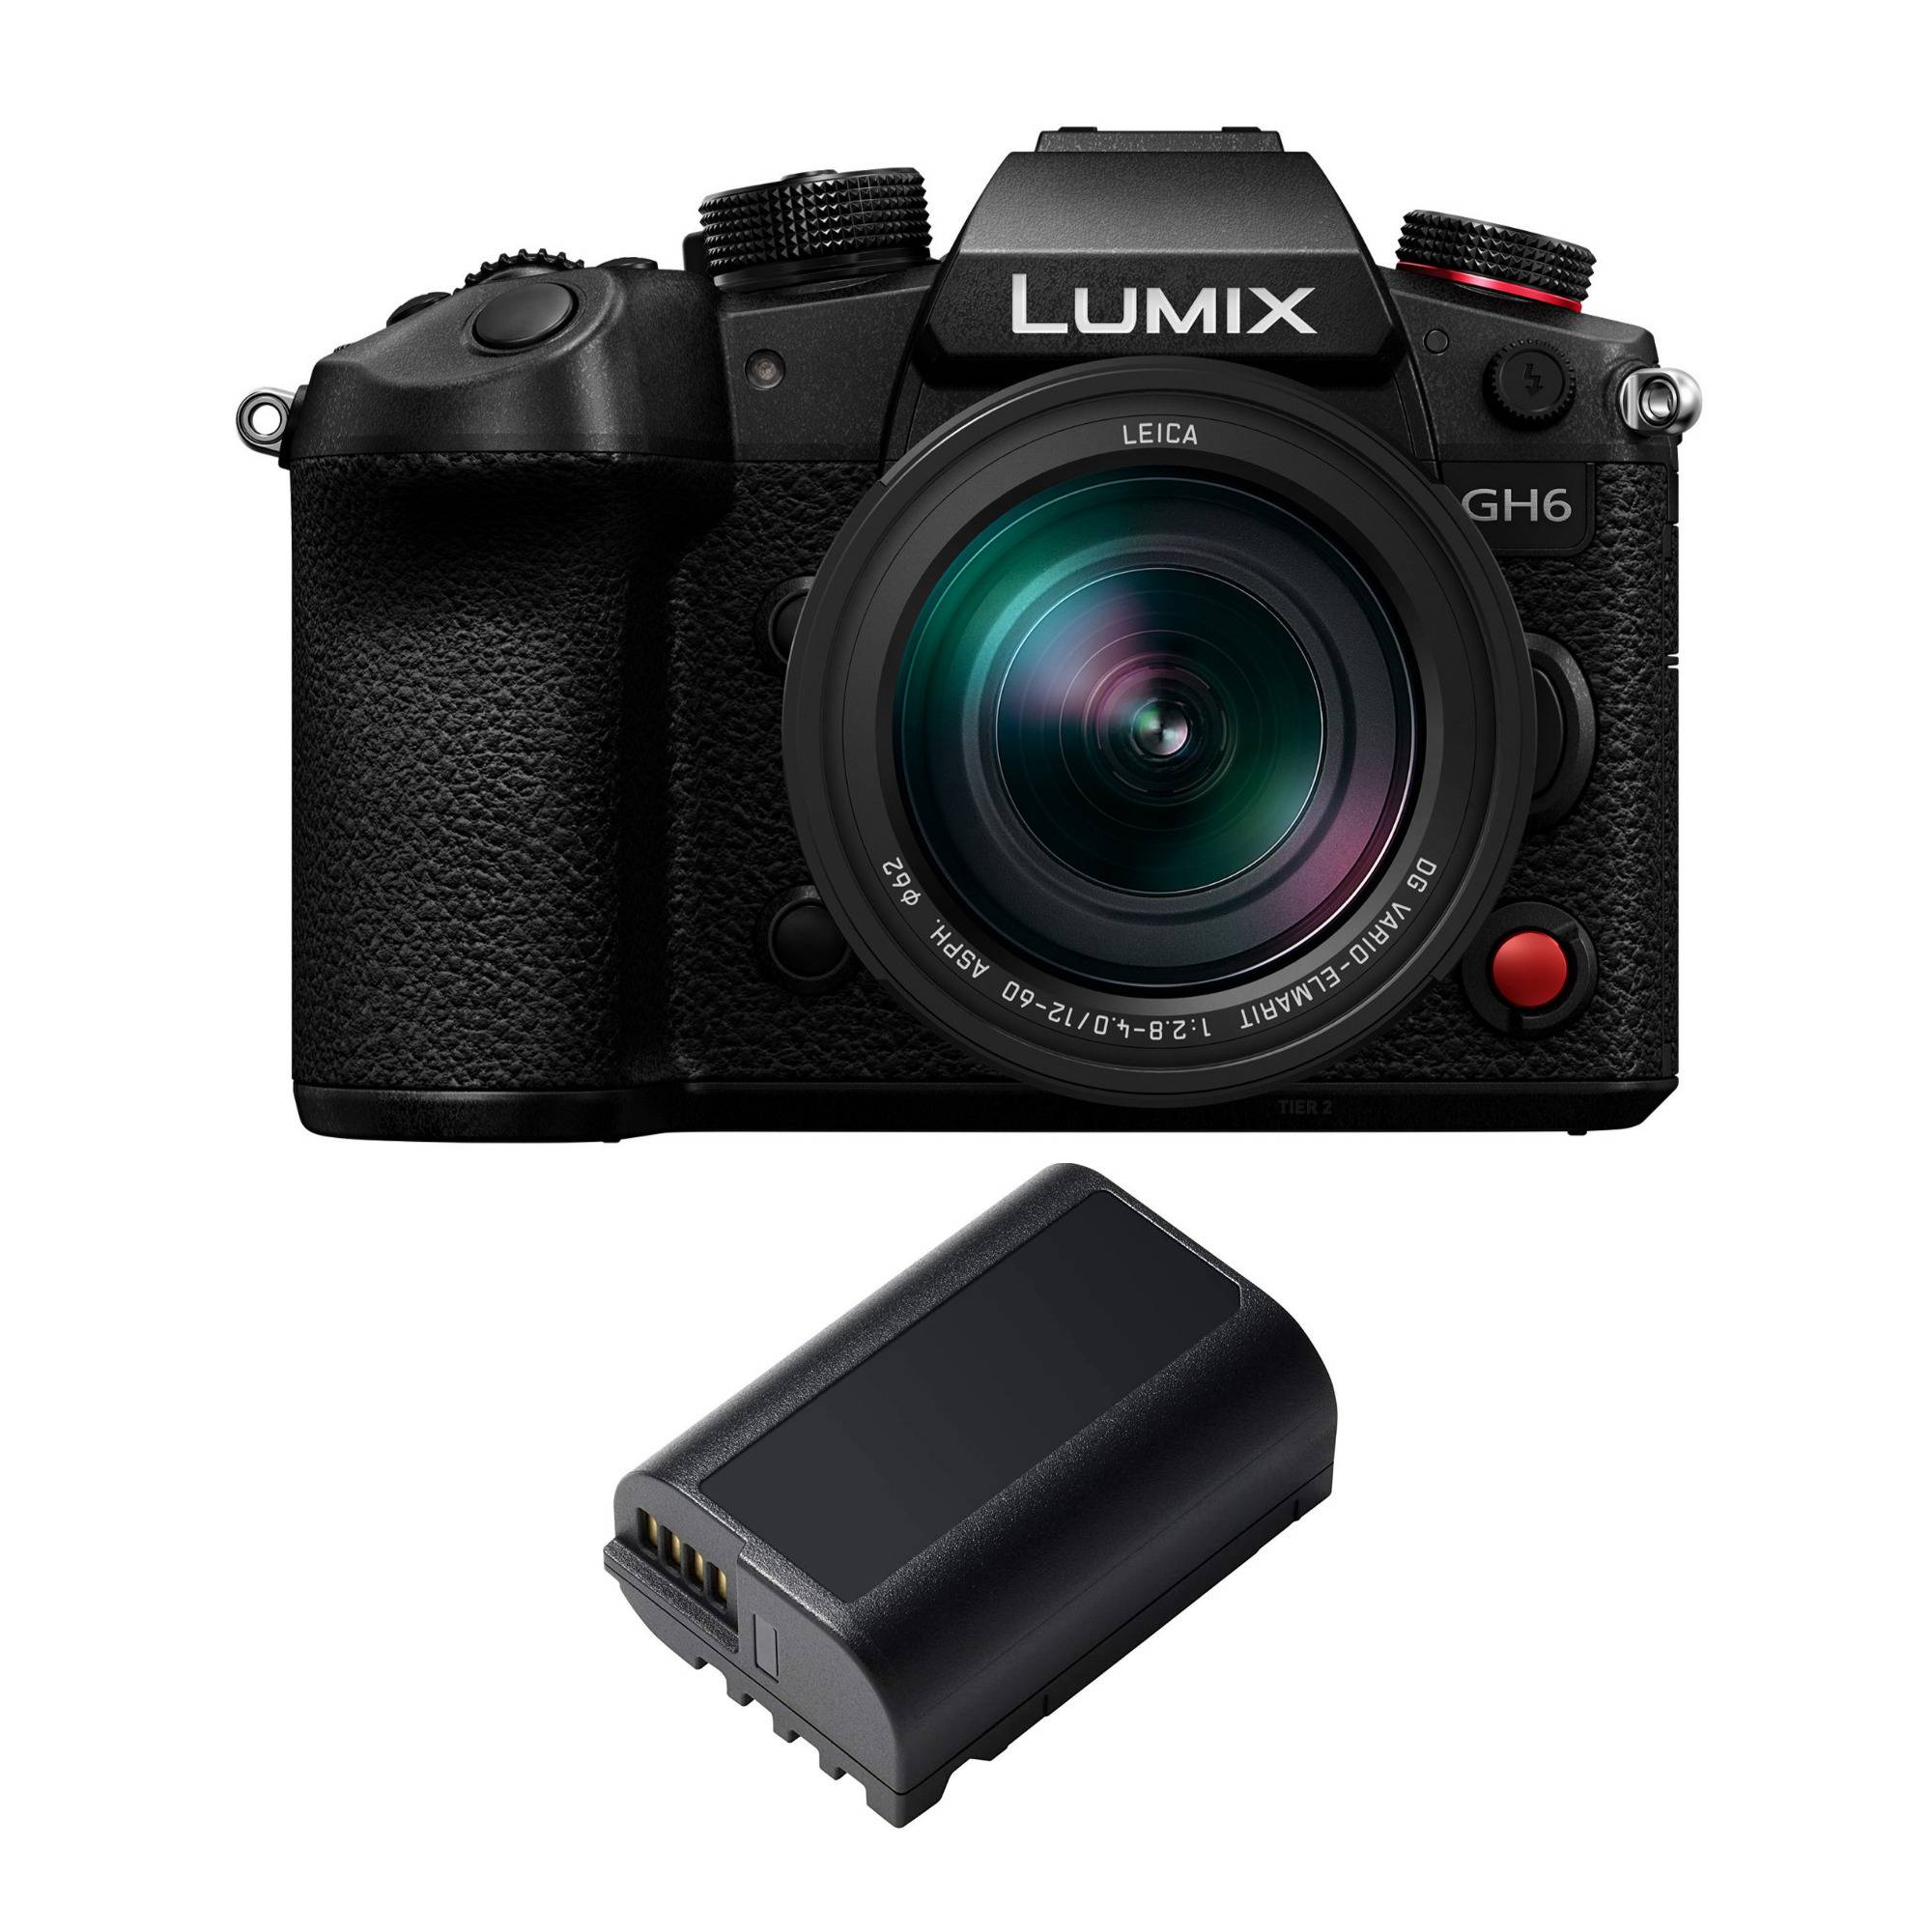 Panasonic Lumix GH6 Mirrorless Camera with 12-60mm f/2.8-4 Lens with Lithium-Ion Battery Pack Bundle